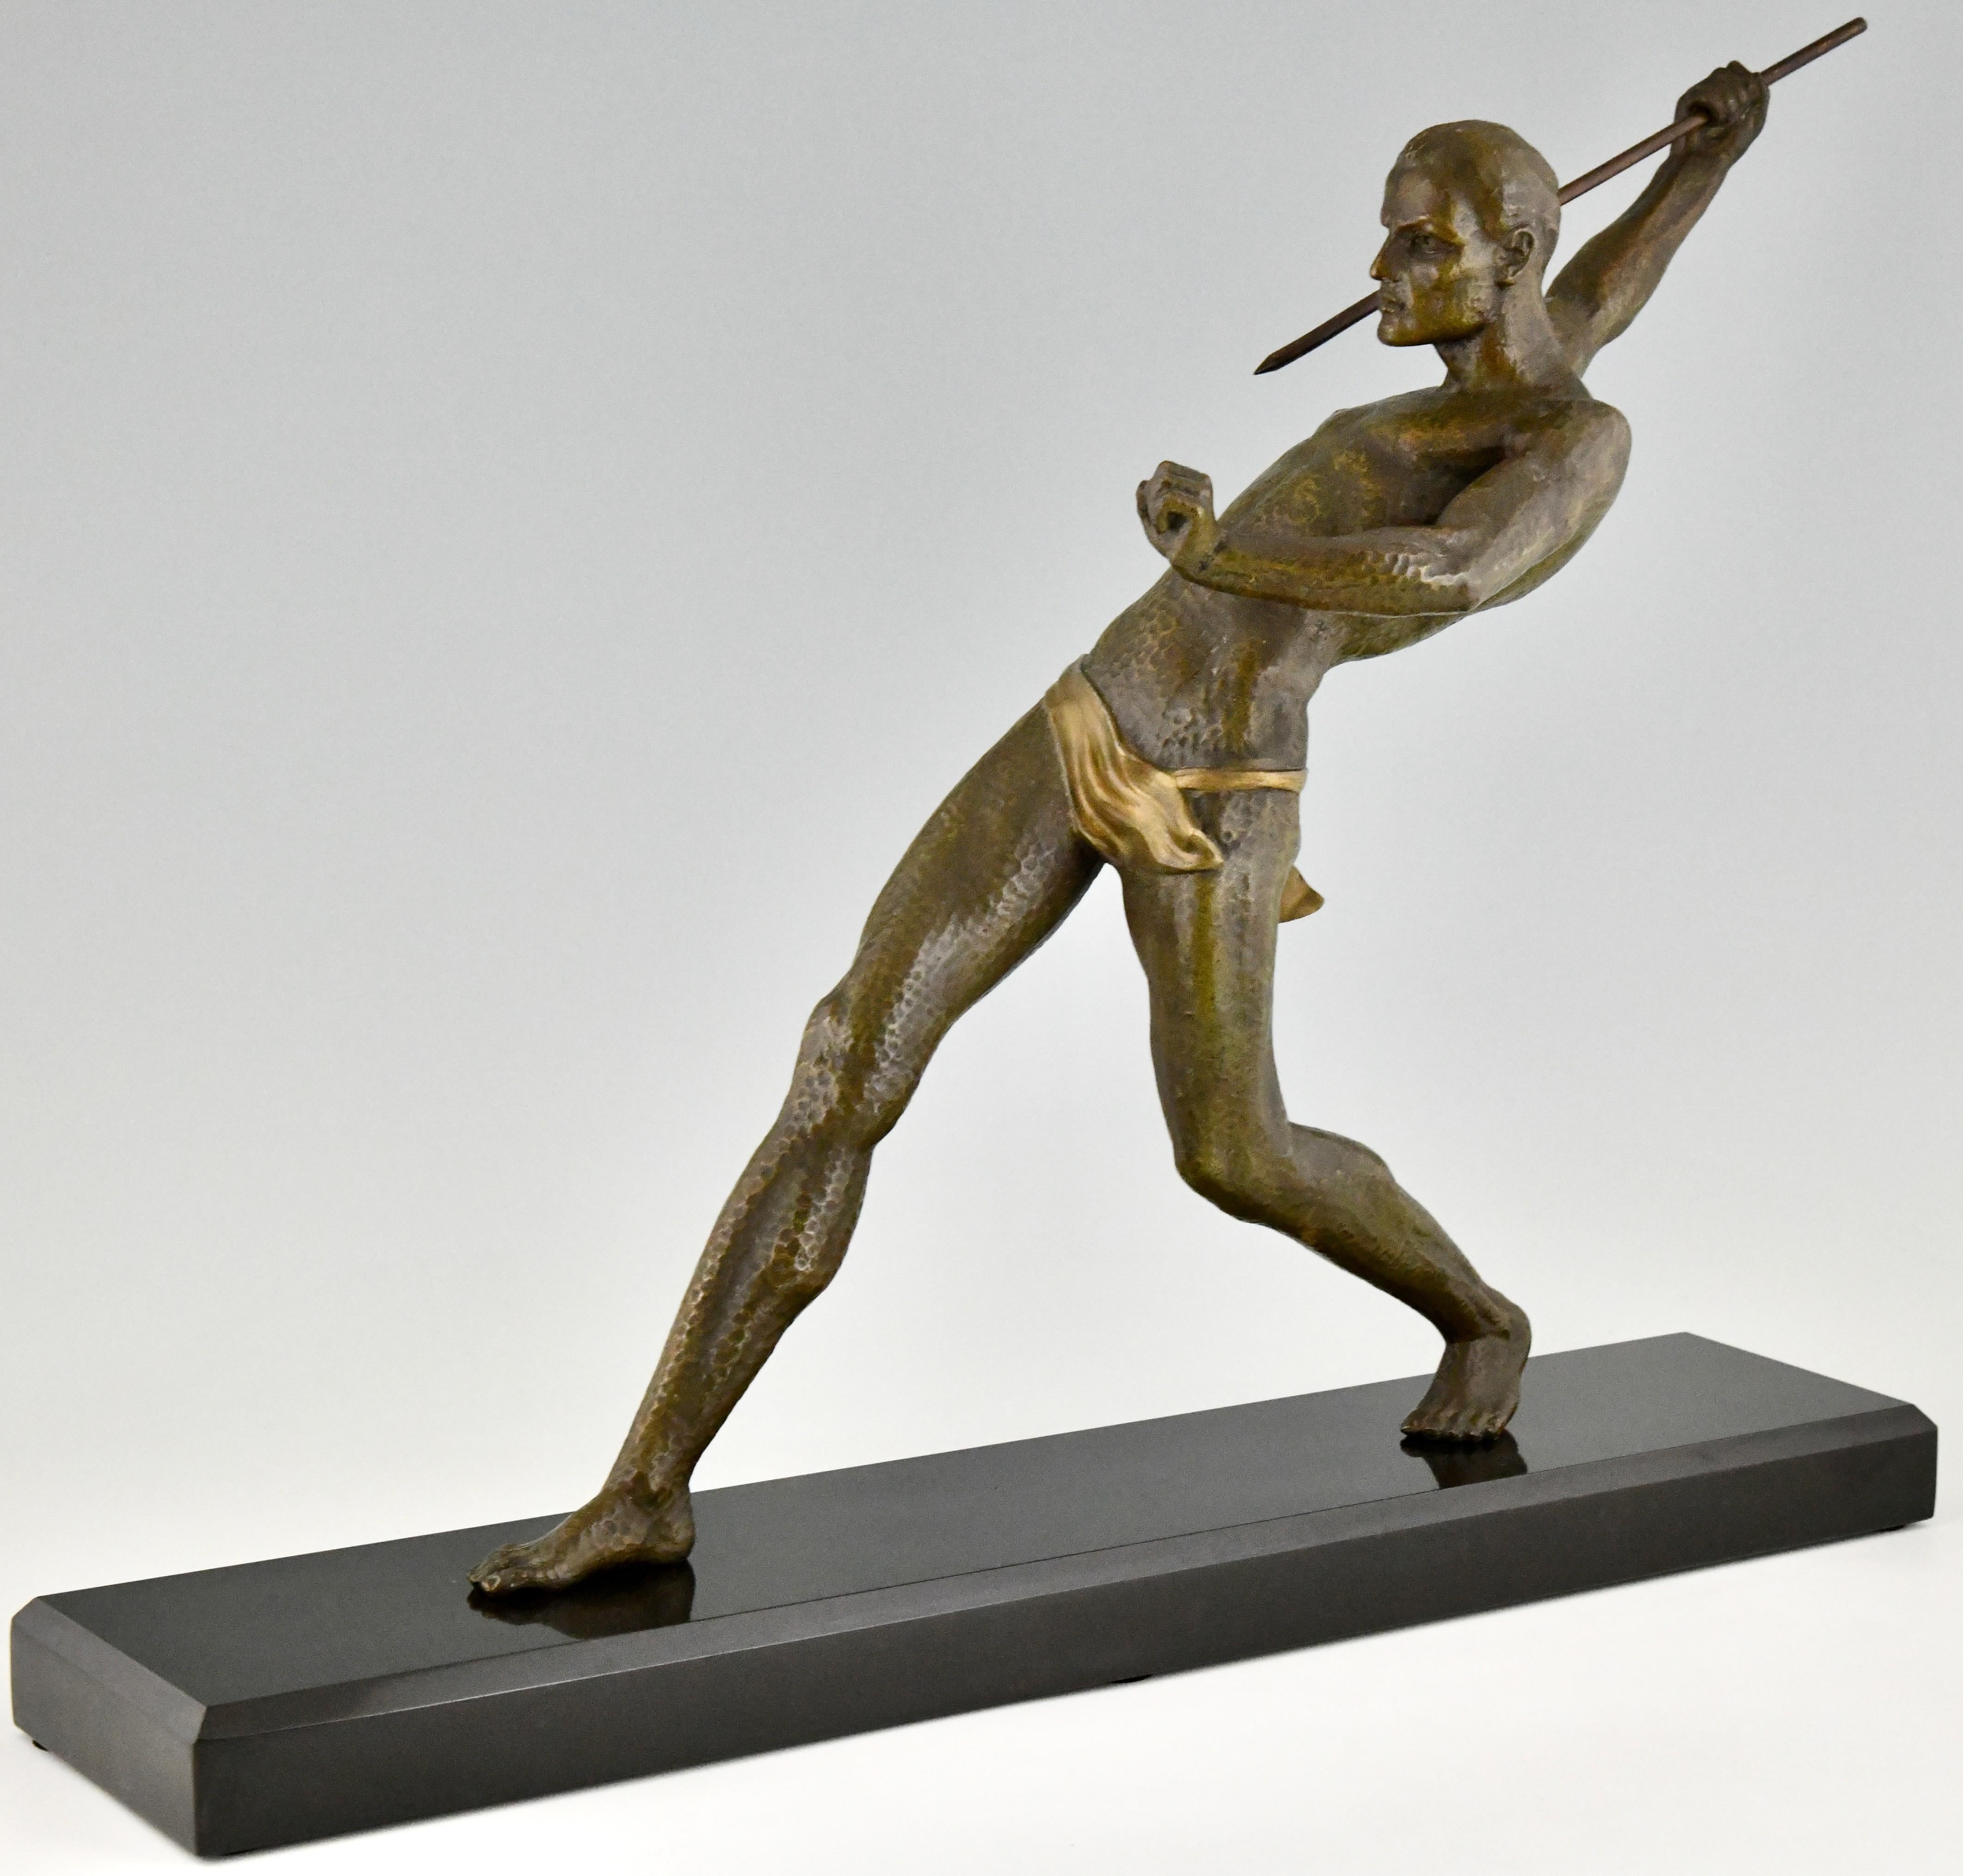 Patinated Art Deco sculpture athlete with spear javelin thrower signed by Limousin, 1930. For Sale